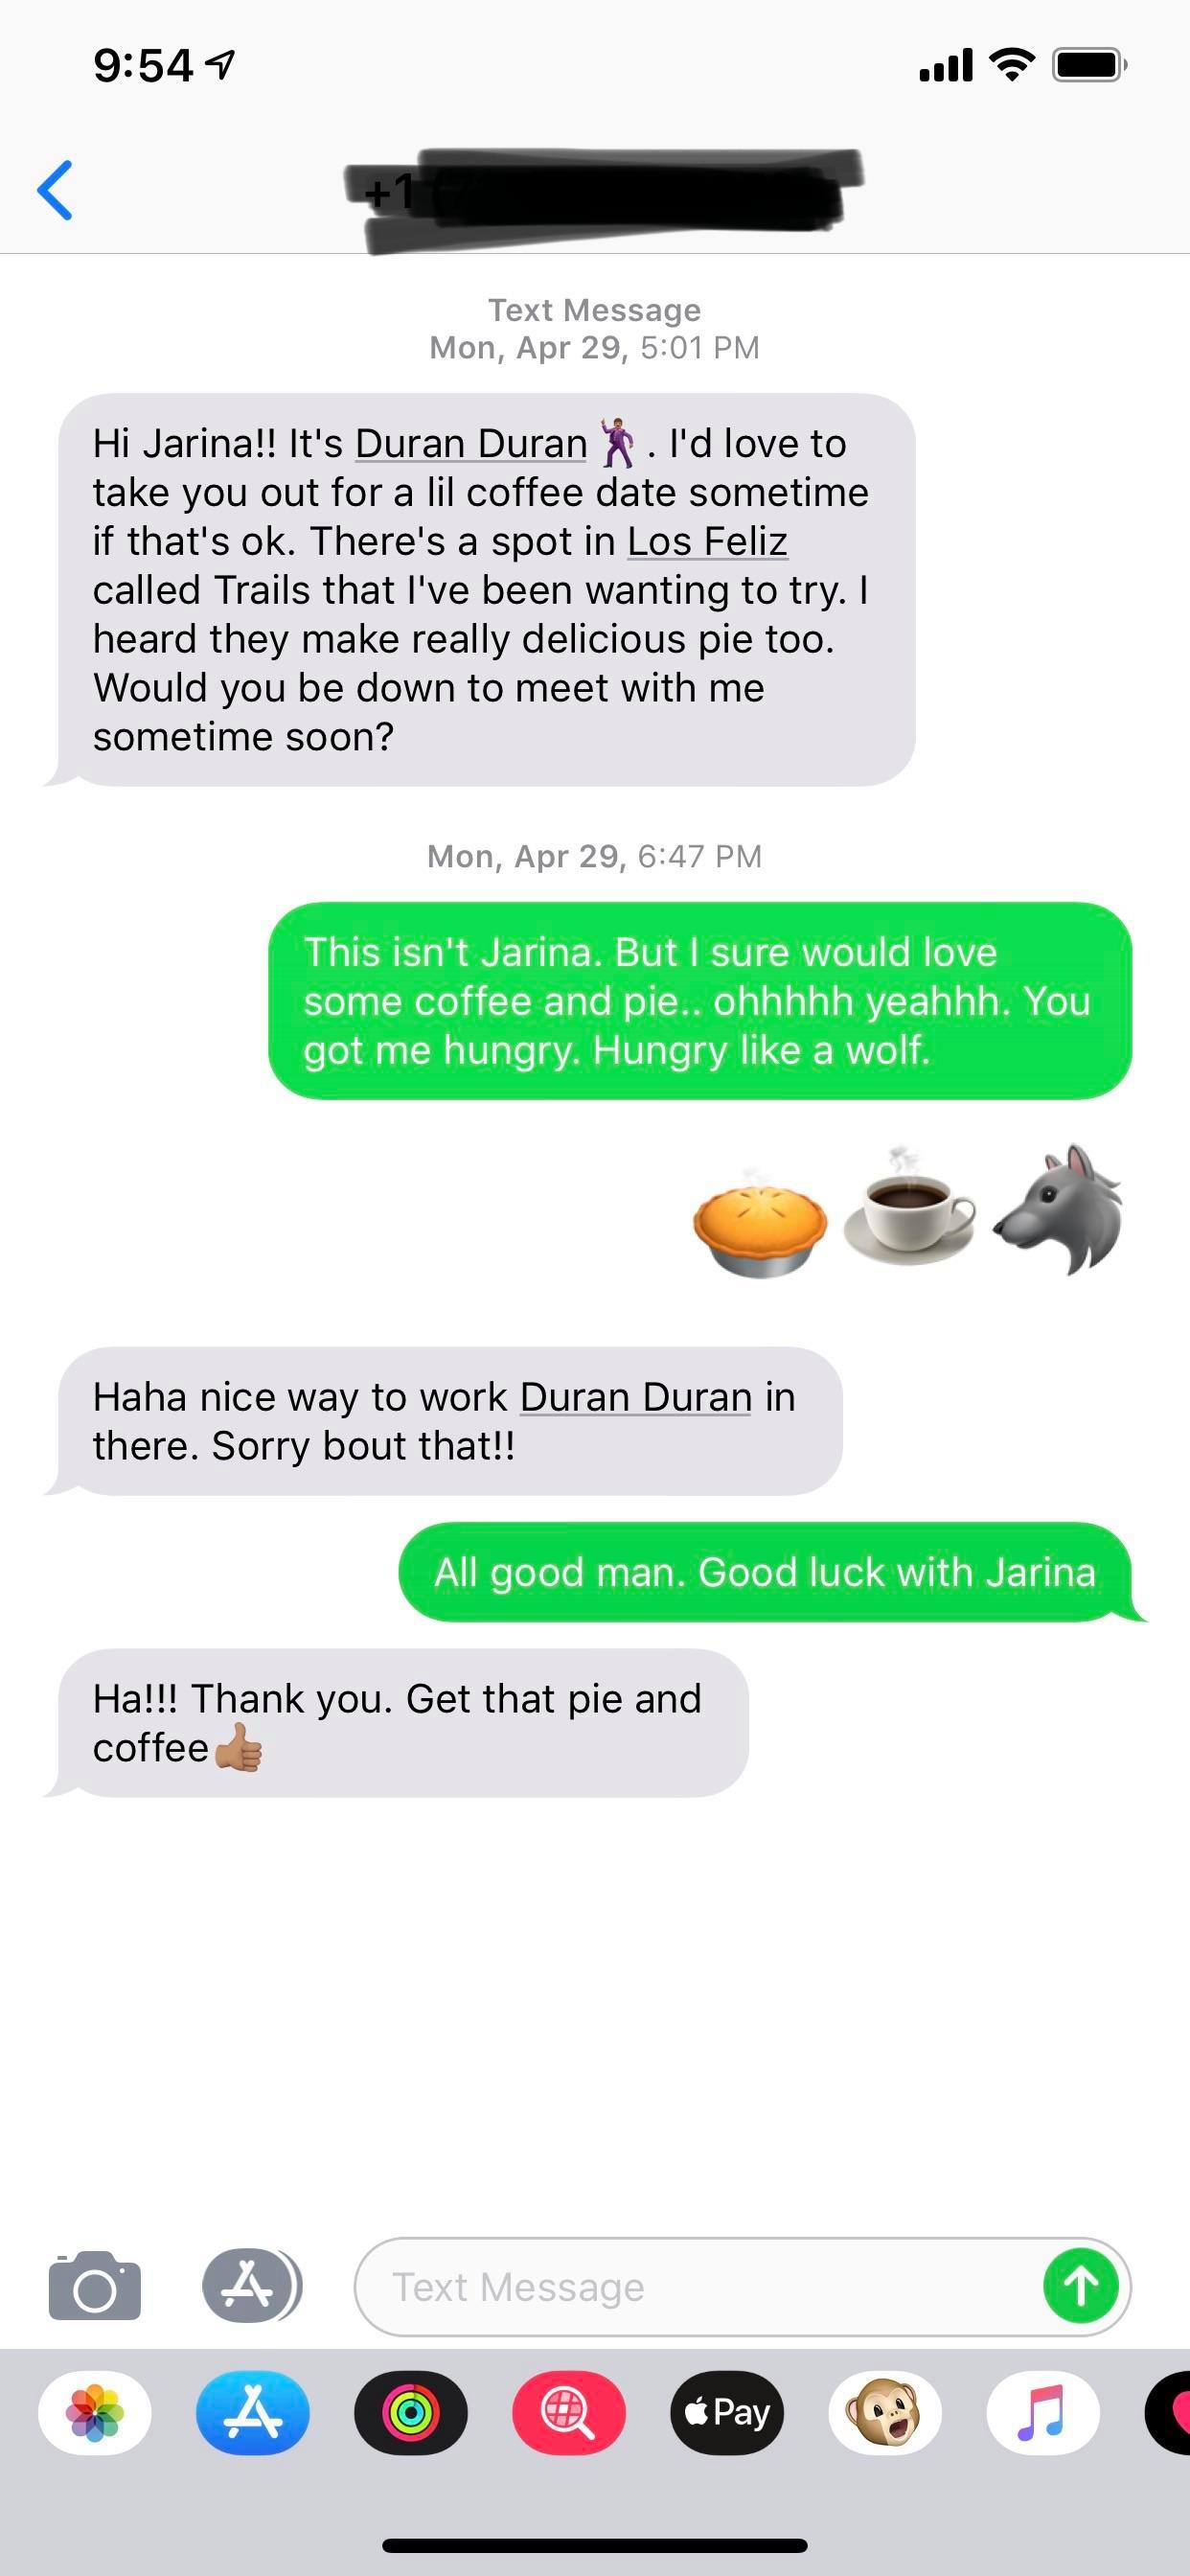 wrong number country puns - 7 Text Message Mon, Apr 29, Hi Jarina!! It's Duran Duran . I'd love to take you out for a lil coffee date sometime if that's ok. There's a spot in Los Feliz called Trails that I've been wanting to try. I heard they make really 